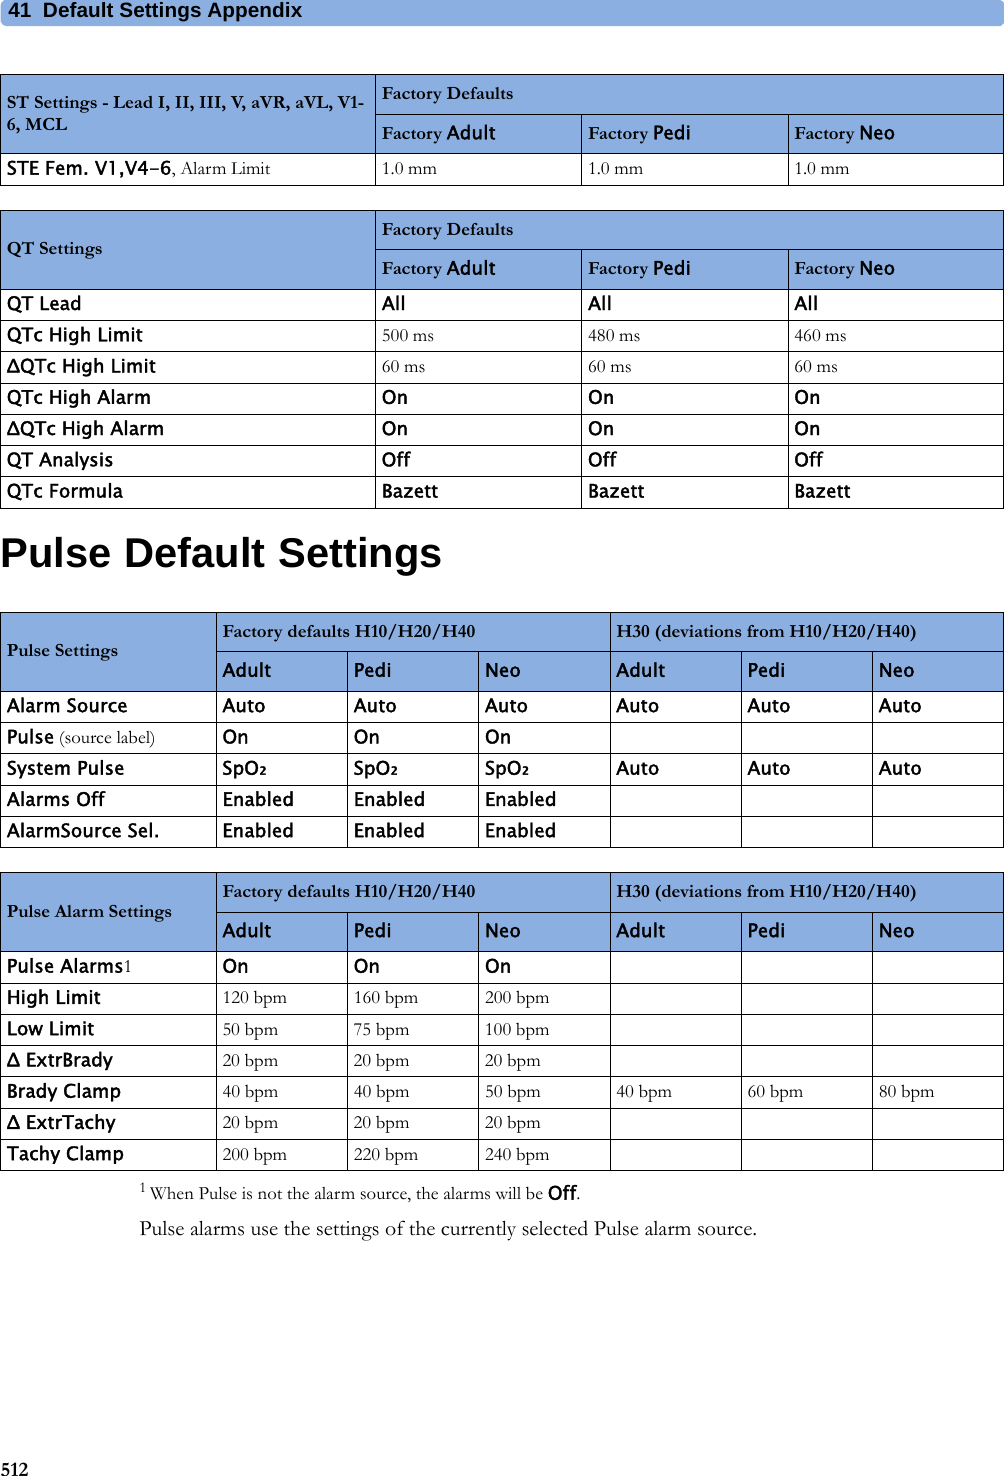 41 Default Settings Appendix512Pulse Default Settings1 When Pulse is not the alarm source, the alarms will be Off.Pulse alarms use the settings of the currently selected Pulse alarm source.STE Fem. V1,V4-6, Alarm Limit 1.0 mm 1.0 mm 1.0 mmST Settings - Lead I, II, III, V, aVR, aVL, V1-6, MCL Factory DefaultsFactory Adult Factory Pedi Factory NeoQT SettingsFactory DefaultsFactory Adult Factory Pedi Factory NeoQT Lead All All AllQTc High Limit 500 ms 480 ms 460 msΔQTc High Limit 60 ms 60 ms 60 msQTc High Alarm OnOnOnΔQTc High Alarm OnOnOnQT Analysis Off Off OffQTc Formula Bazett Bazett BazettPulse SettingsFactory defaults H10/H20/H40 H30 (deviations from H10/H20/H40)Adult Pedi Neo Adult Pedi NeoAlarm Source Auto Auto Auto Auto Auto AutoPulse (source label) On On OnSystem Pulse SpO₂SpO₂SpO₂Auto Auto AutoAlarms Off Enabled Enabled EnabledAlarmSource Sel. Enabled Enabled EnabledPulse Alarm SettingsFactory defaults H10/H20/H40 H30 (deviations from H10/H20/H40)Adult Pedi Neo Adult Pedi NeoPulse Alarms1On On OnHigh Limit 120 bpm 160 bpm 200 bpmLow Limit 50 bpm 75 bpm 100 bpmΔ ExtrBrady 20 bpm 20 bpm 20 bpmBrady Clamp 40 bpm40 bpm50 bpm40 bpm60 bpm80 bpmΔ ExtrTachy 20 bpm 20 bpm 20 bpmTachy Clamp 200 bpm 220 bpm 240 bpm